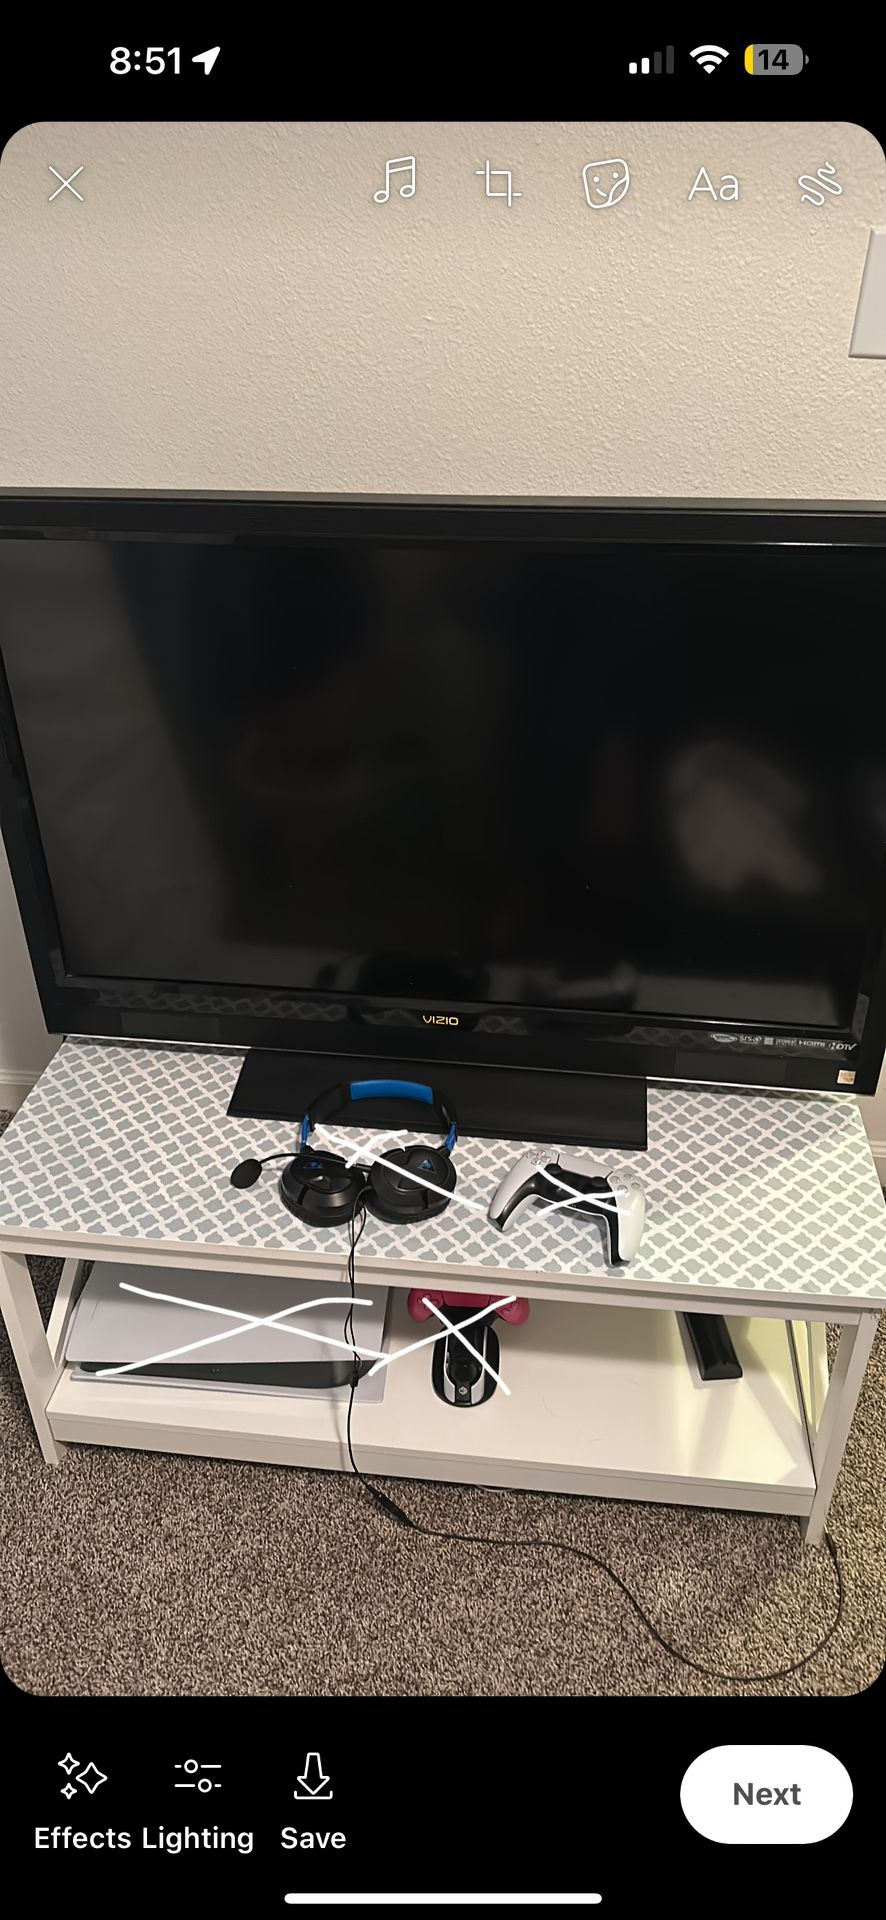 Tv And stand 